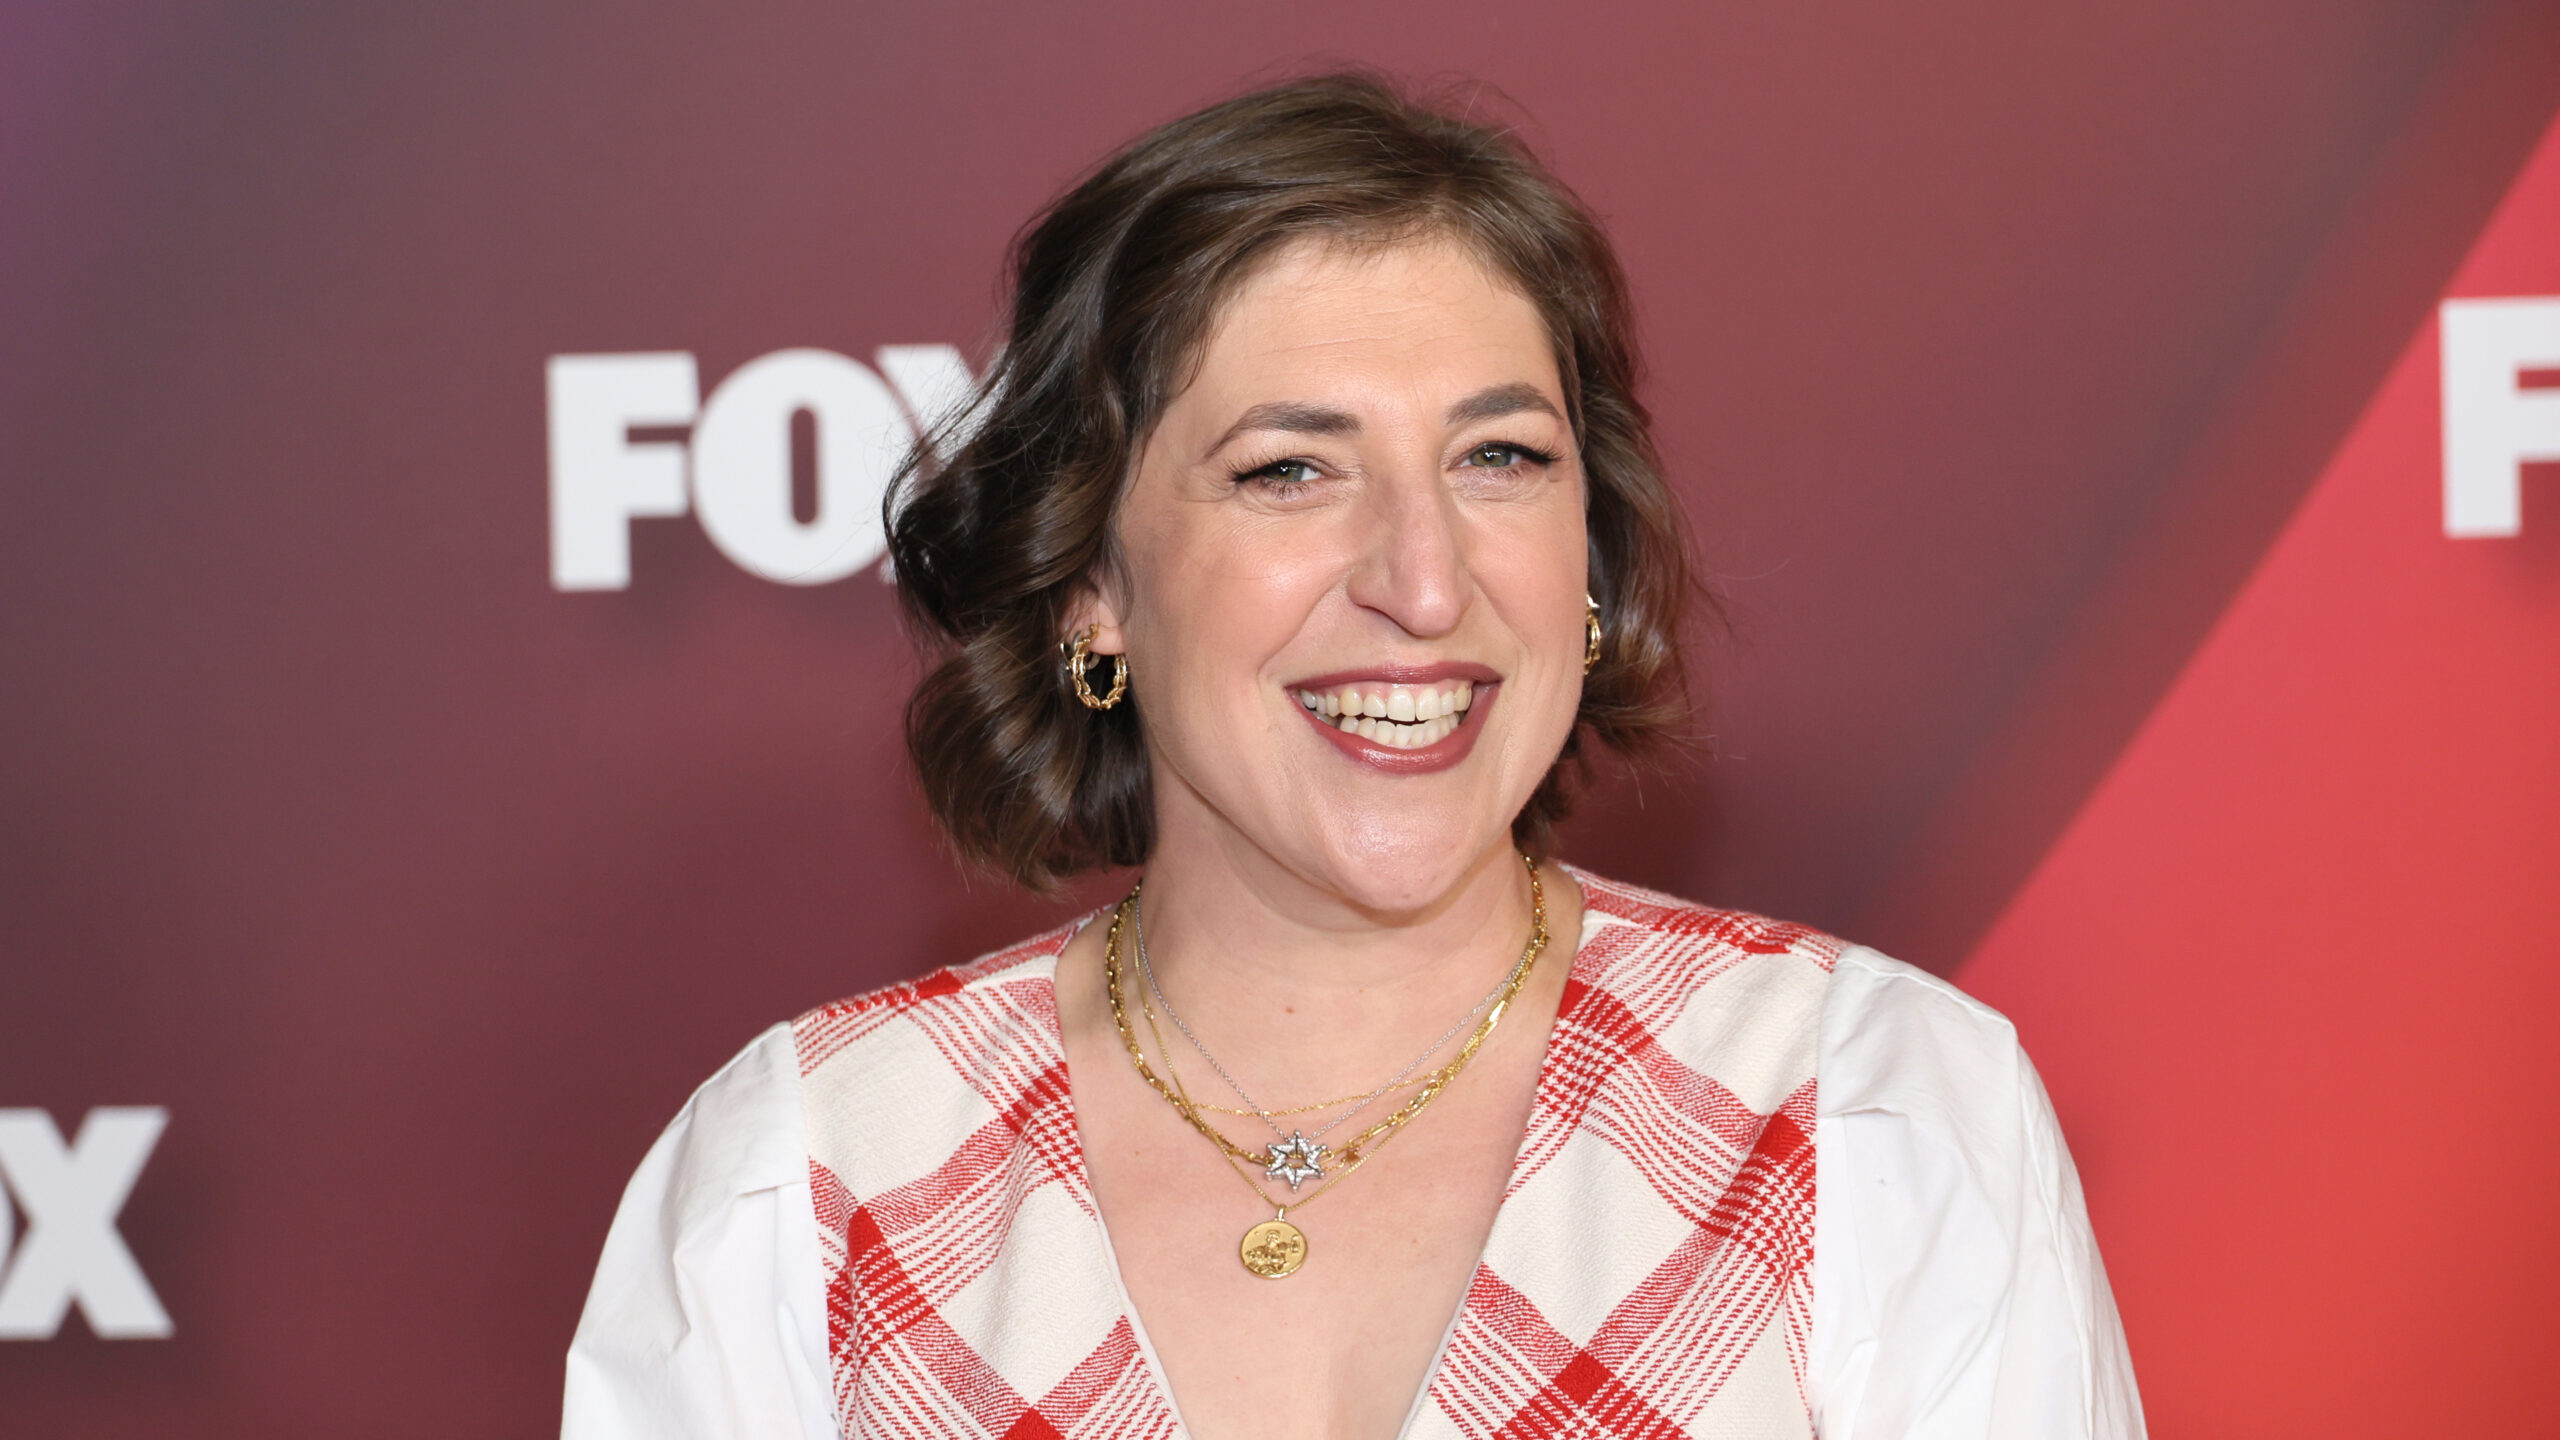 Mayim Bialik is out as a ‘Jeopardy!’ host, leaving longtime champ Ken Jennings to solo